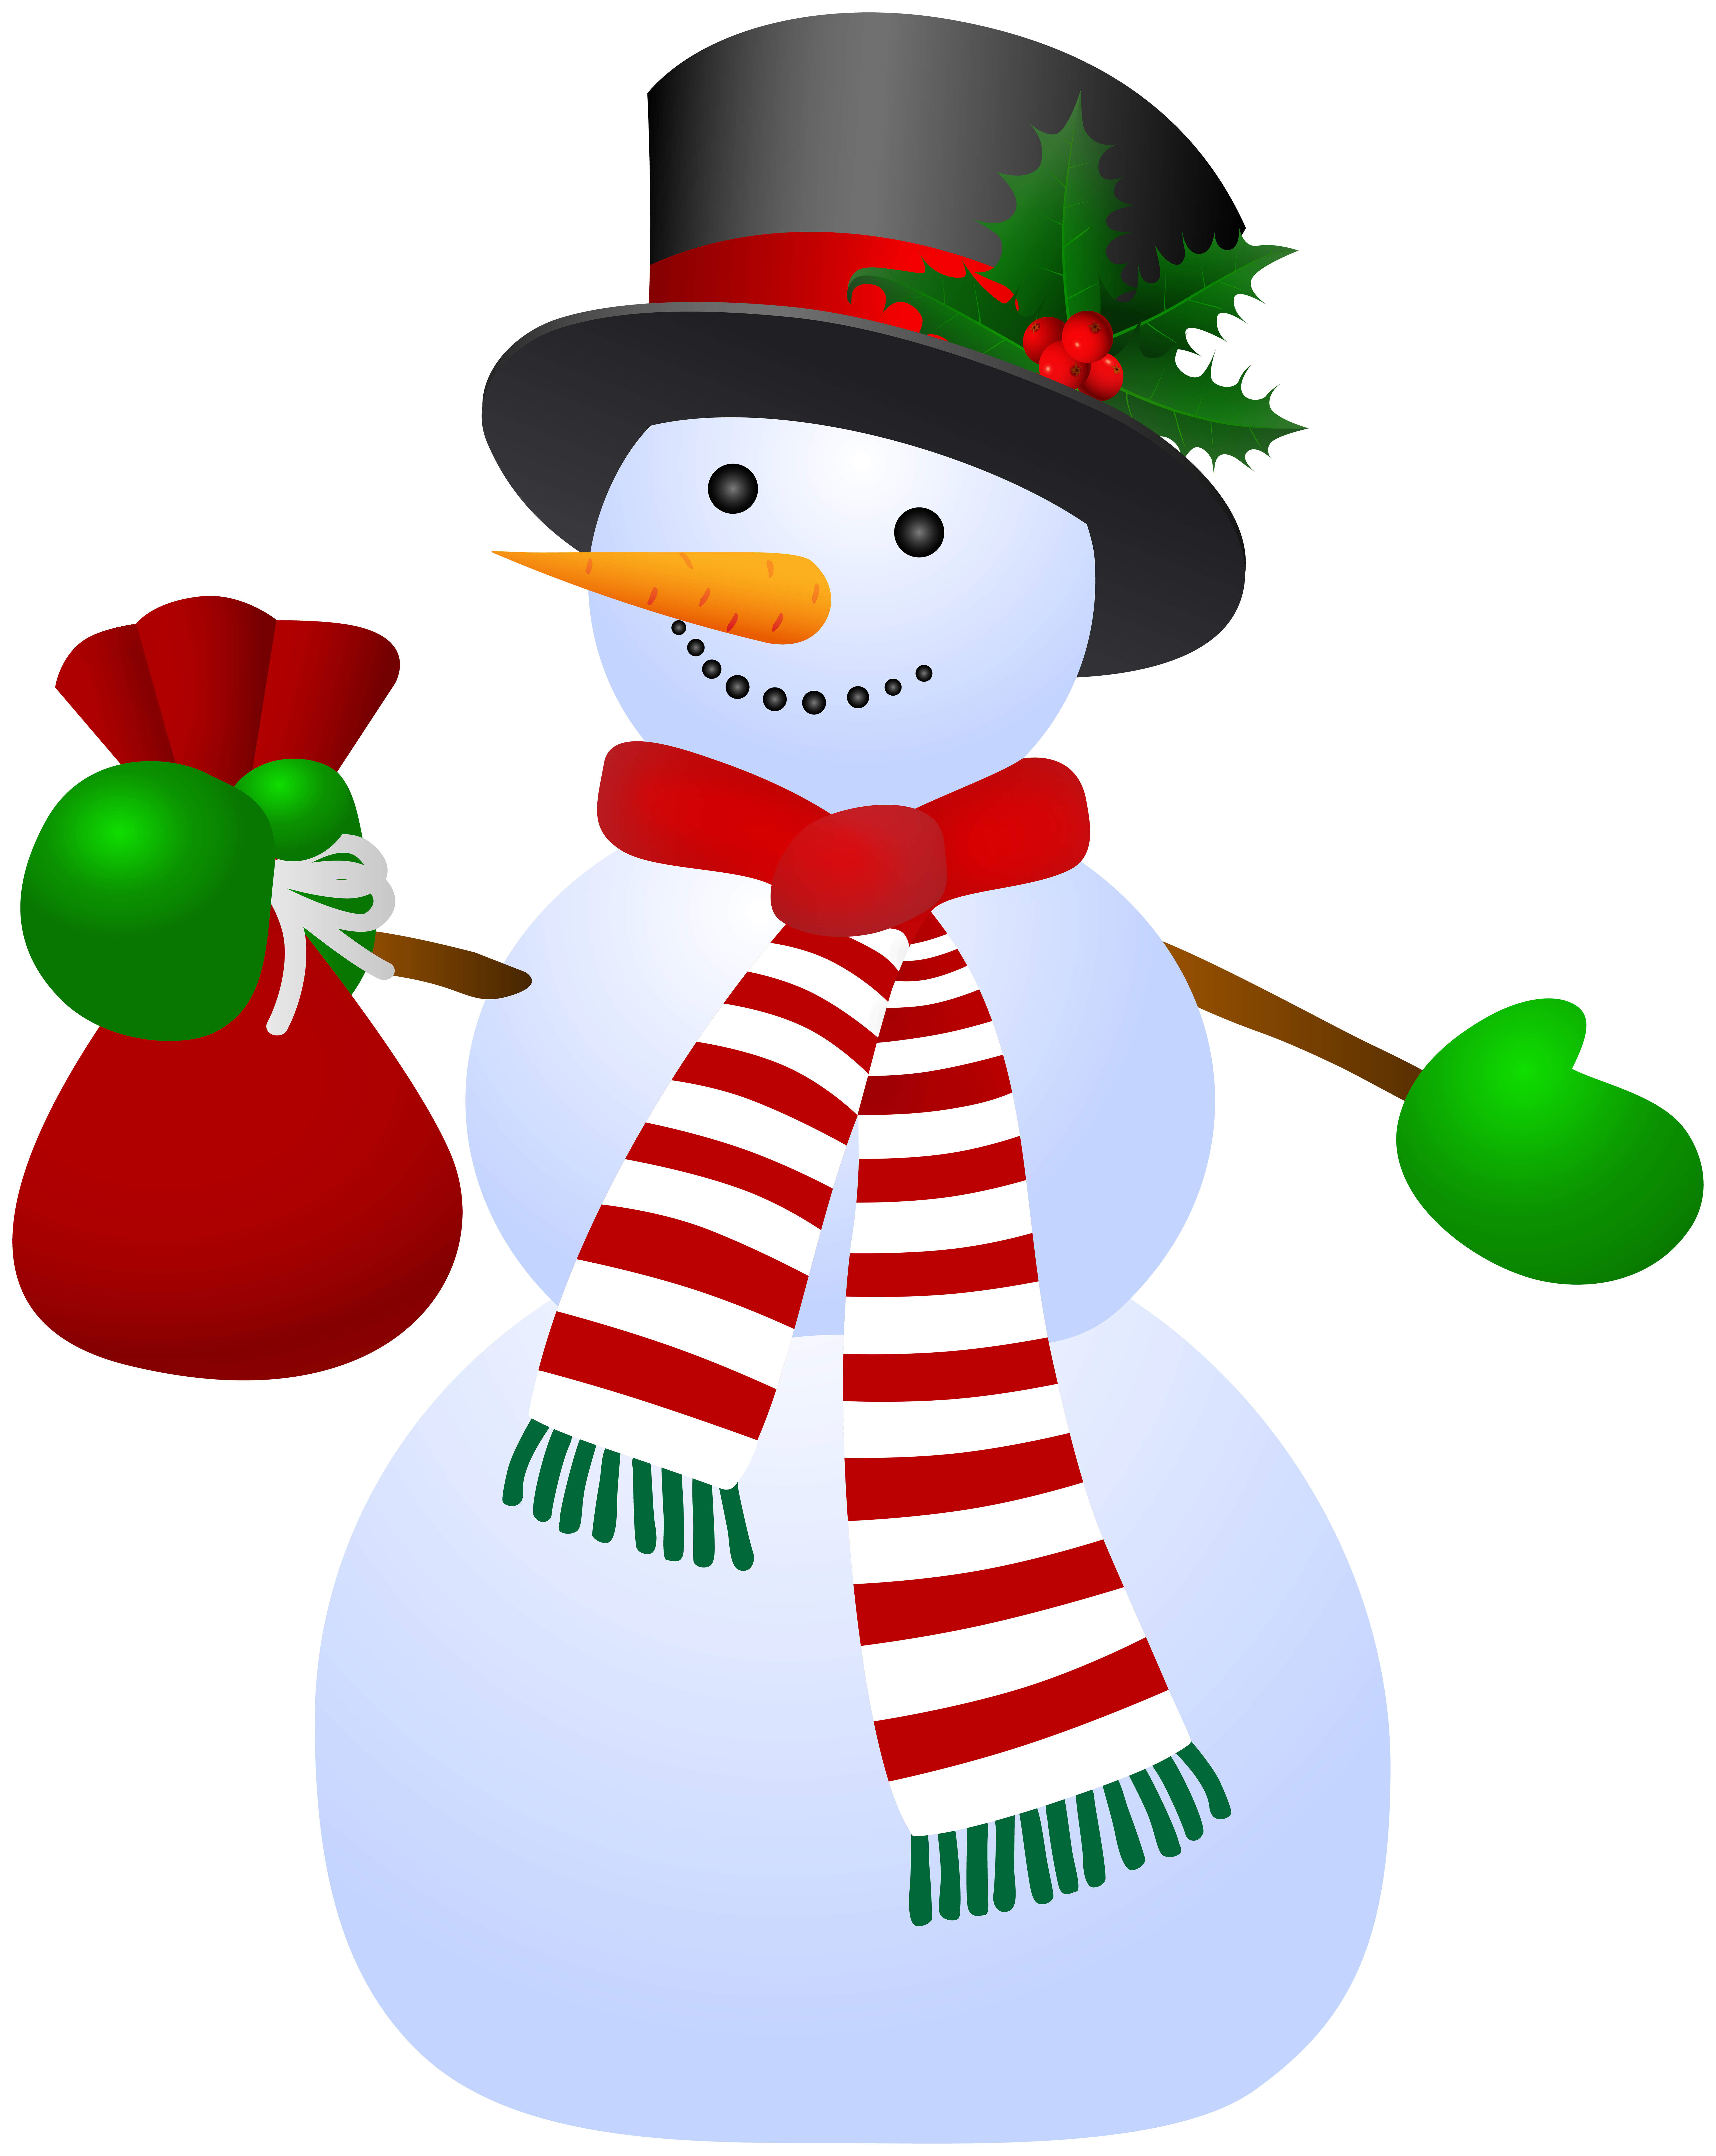 https://gallery.yopriceville.com/var/albums/Free-Clipart-Pictures/Christmas-PNG/Snowman_with_Scarf_PNG_Clipart-2075795669.png?m=1605878178